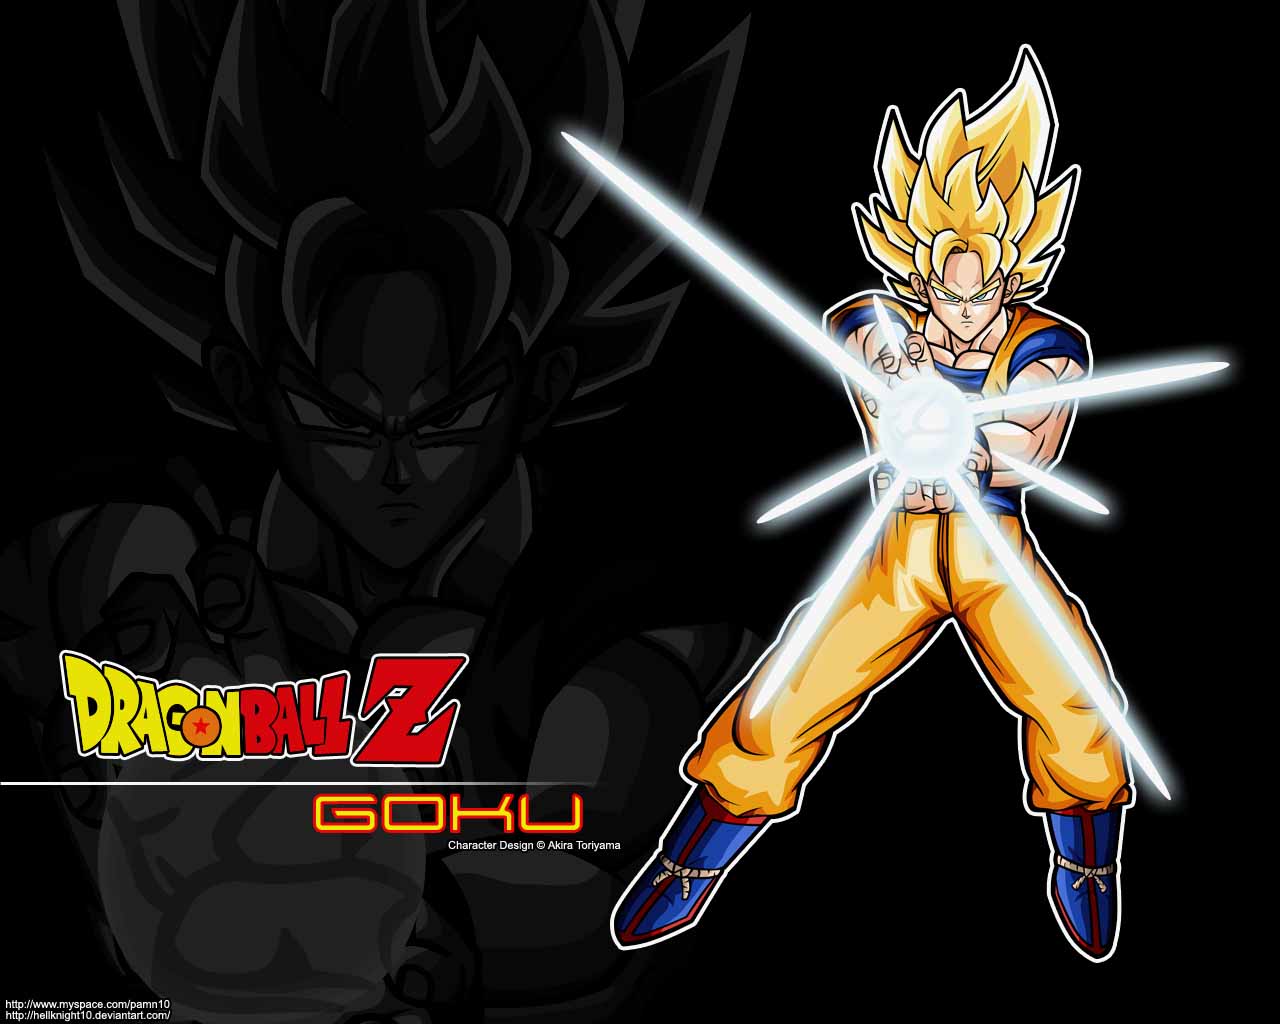 This Share To Labels Goku Desktop